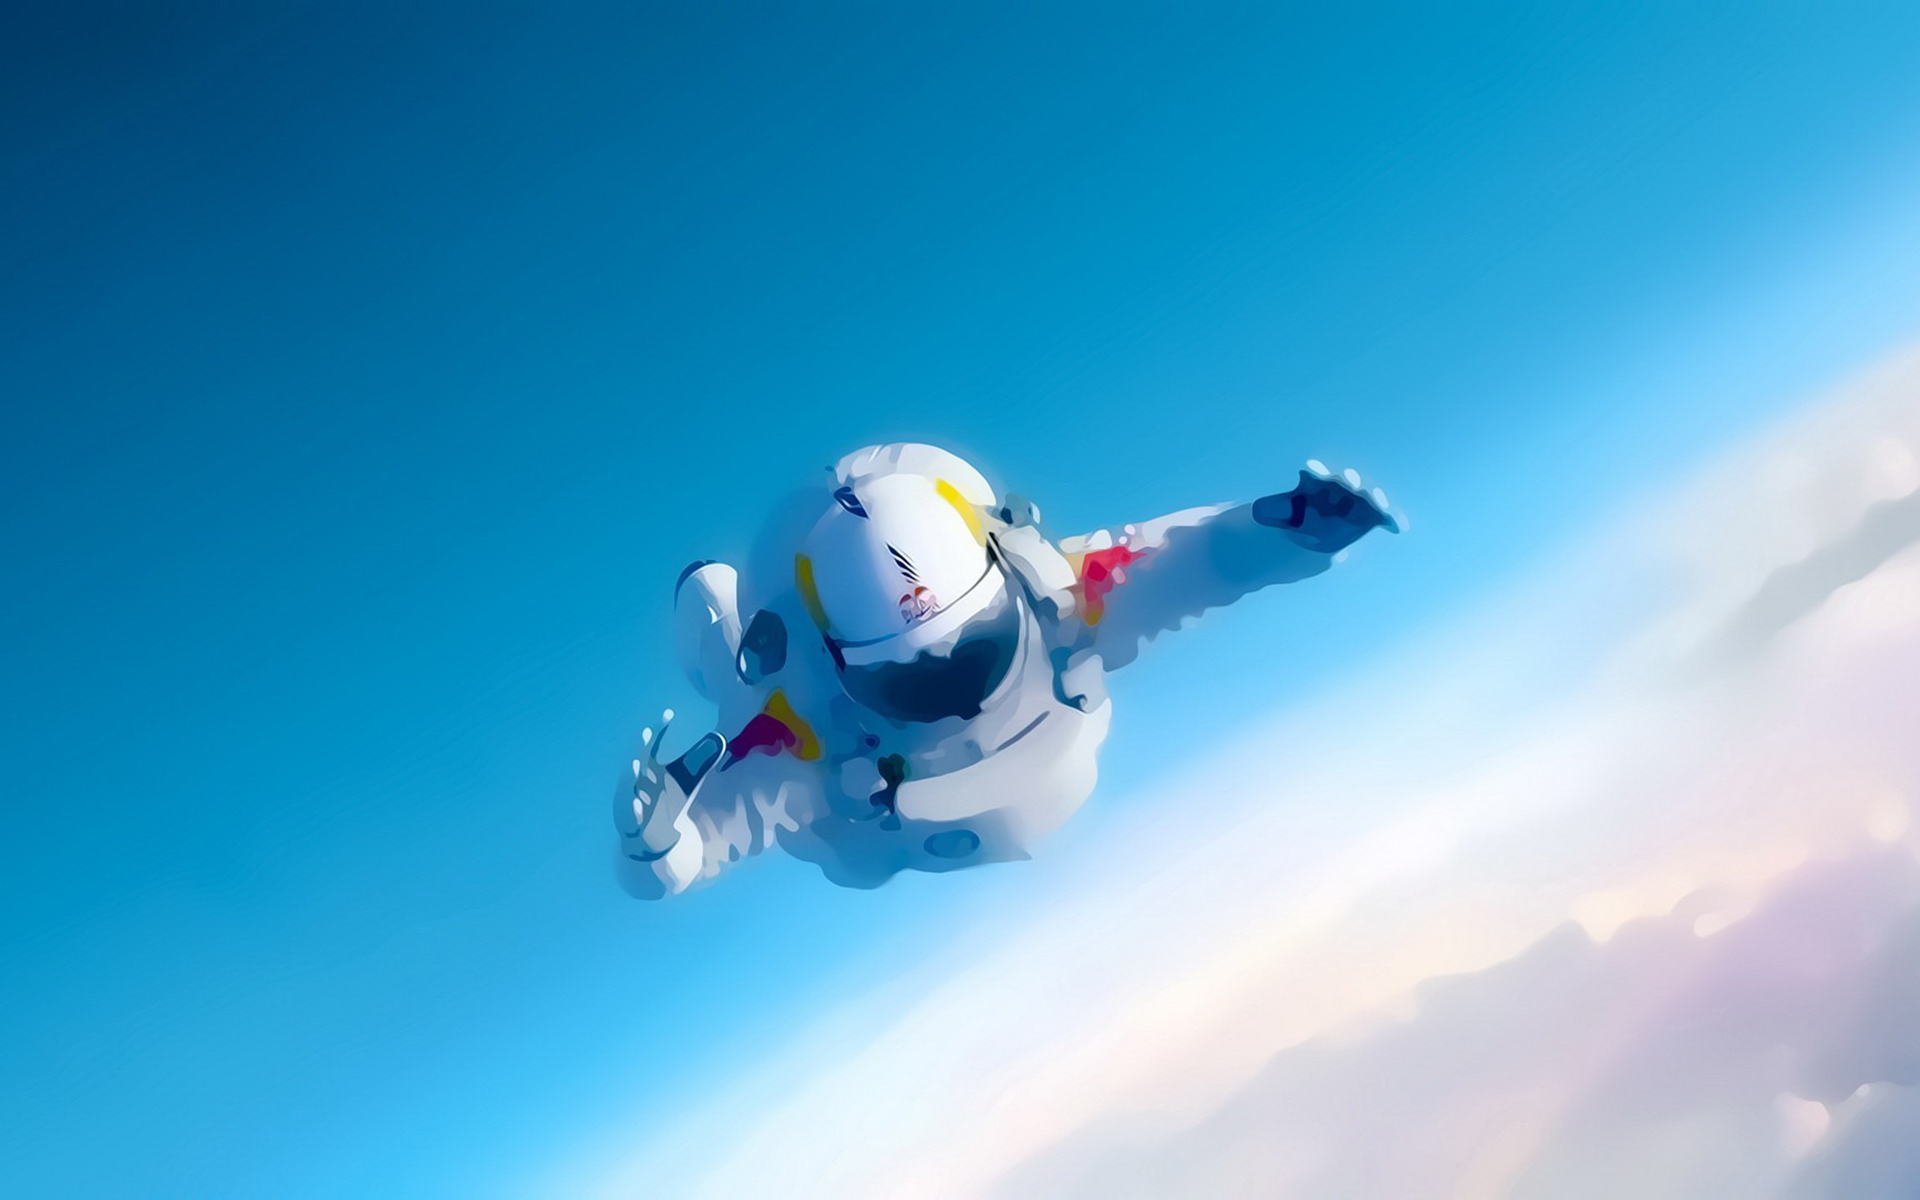 skydiving, artistic, redbulls fly, astronaut, red bull, sky images